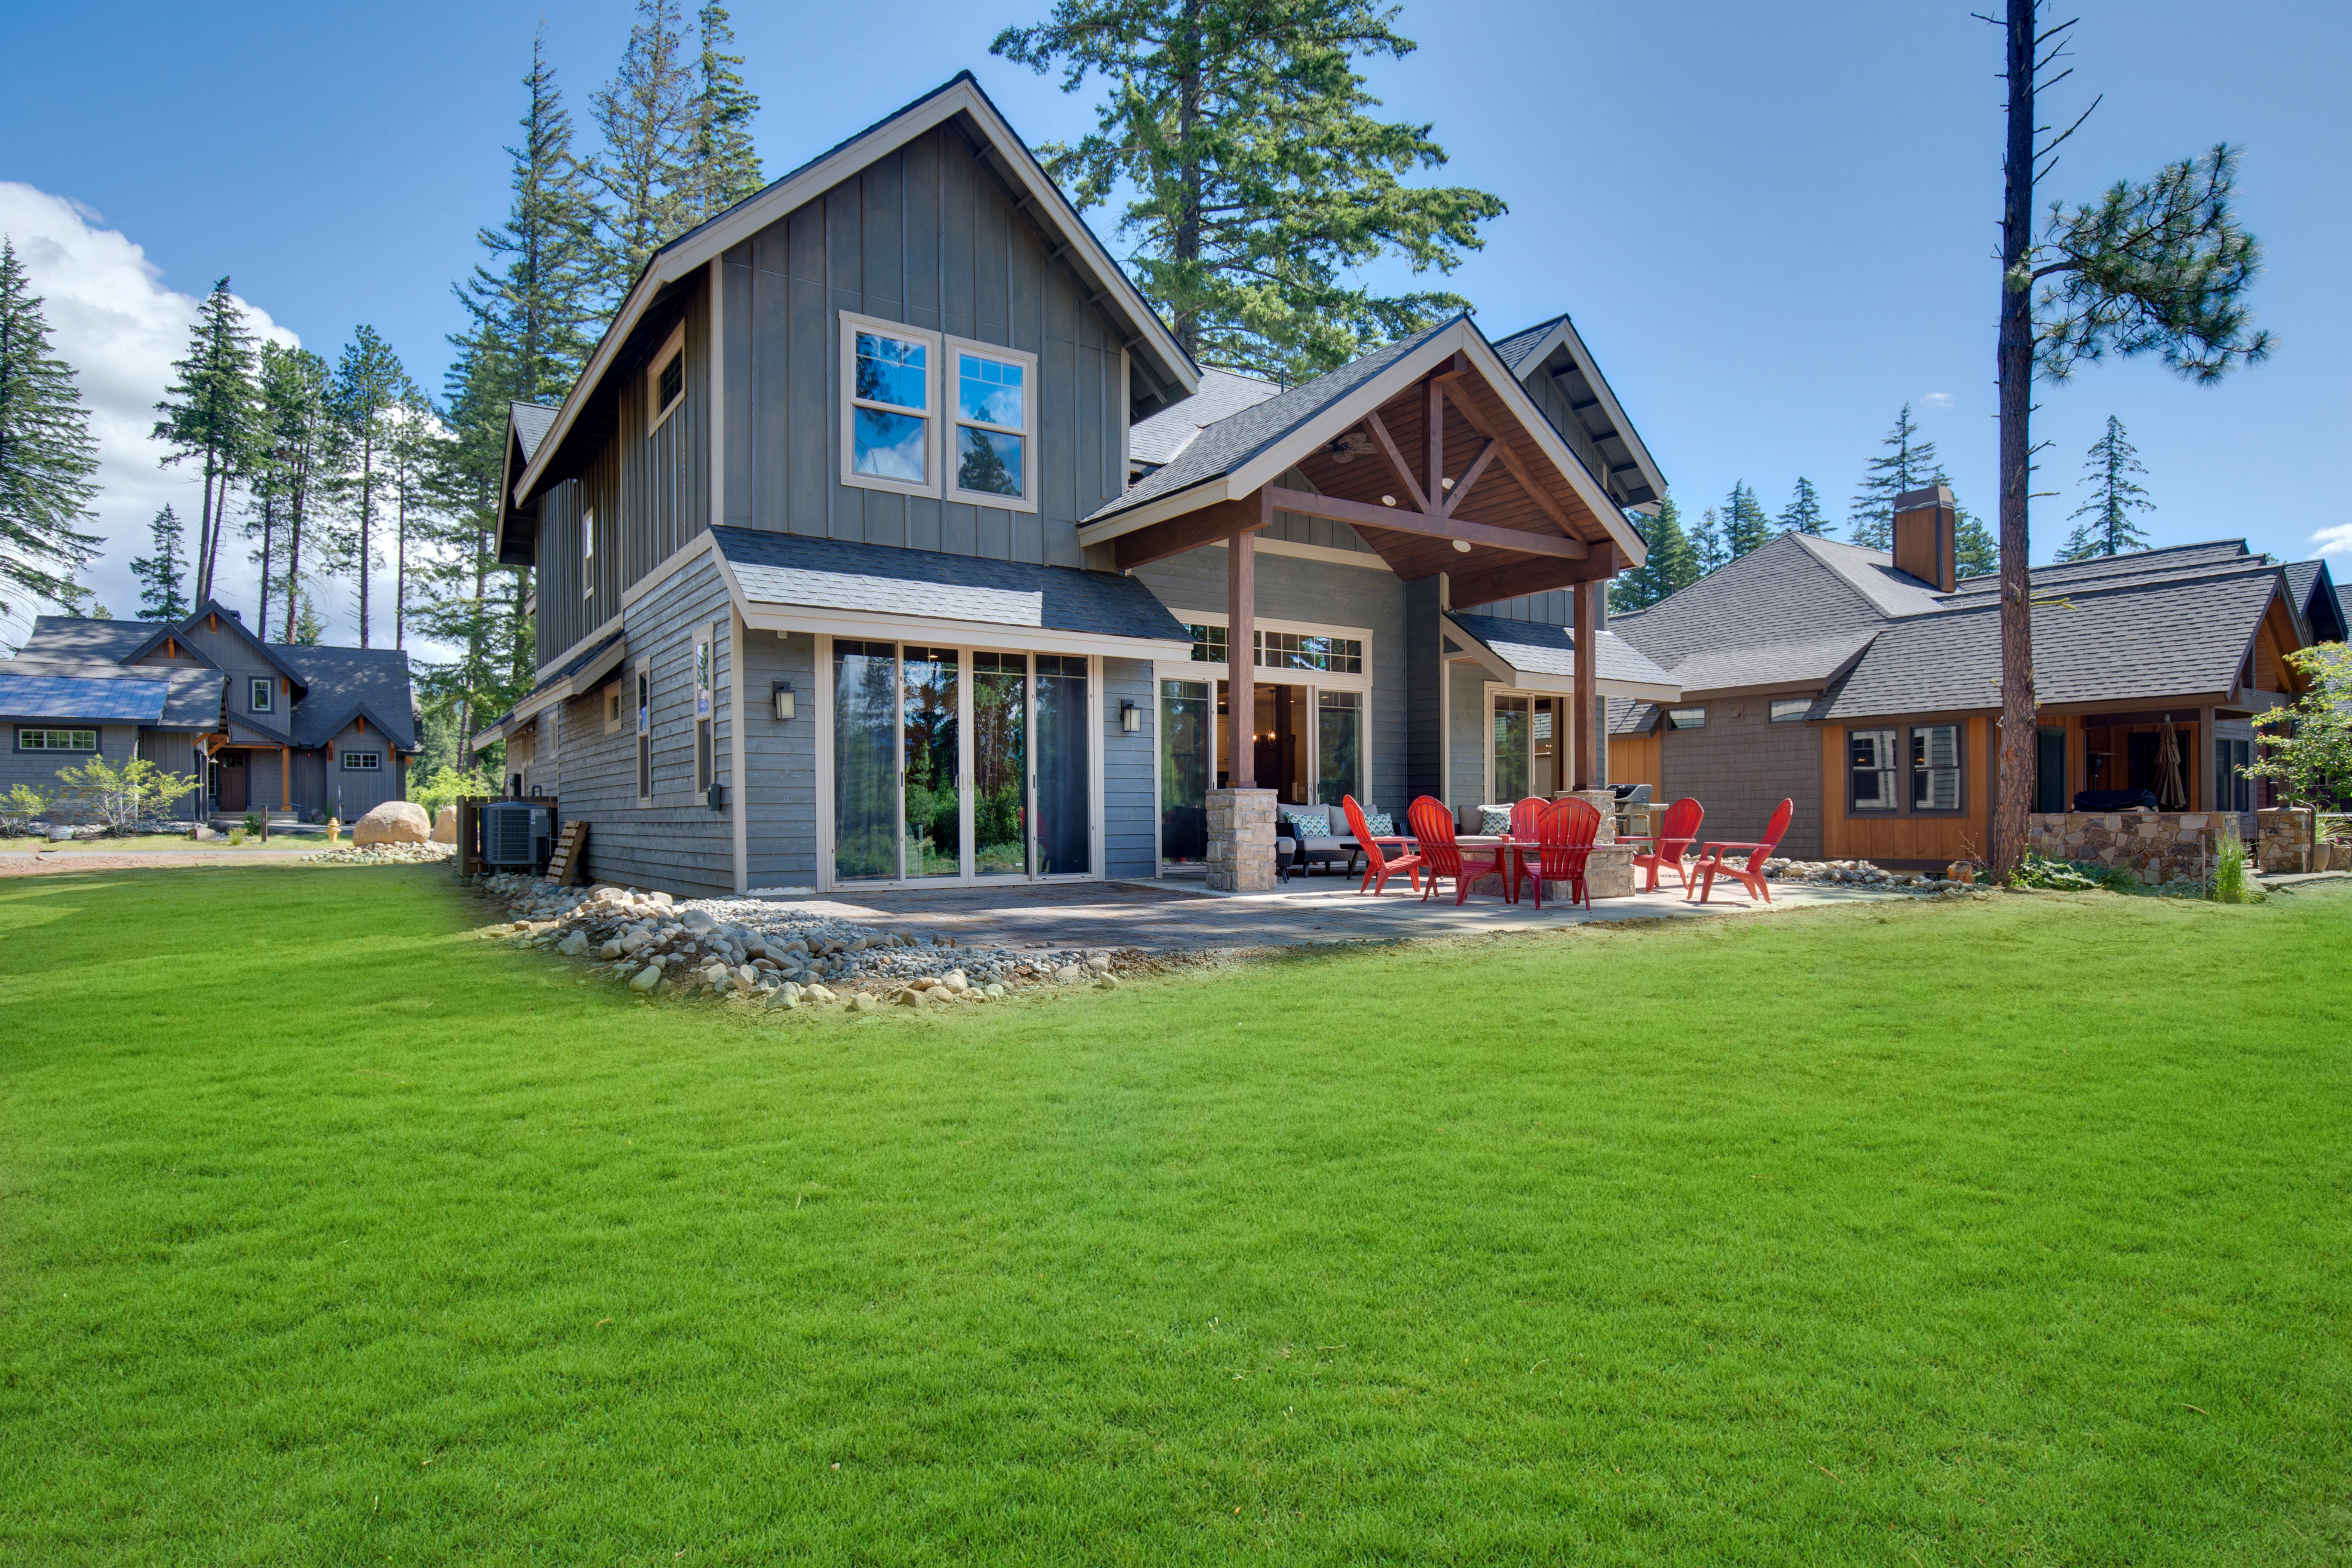 The Things You Need to Know Before Building a Custom Home